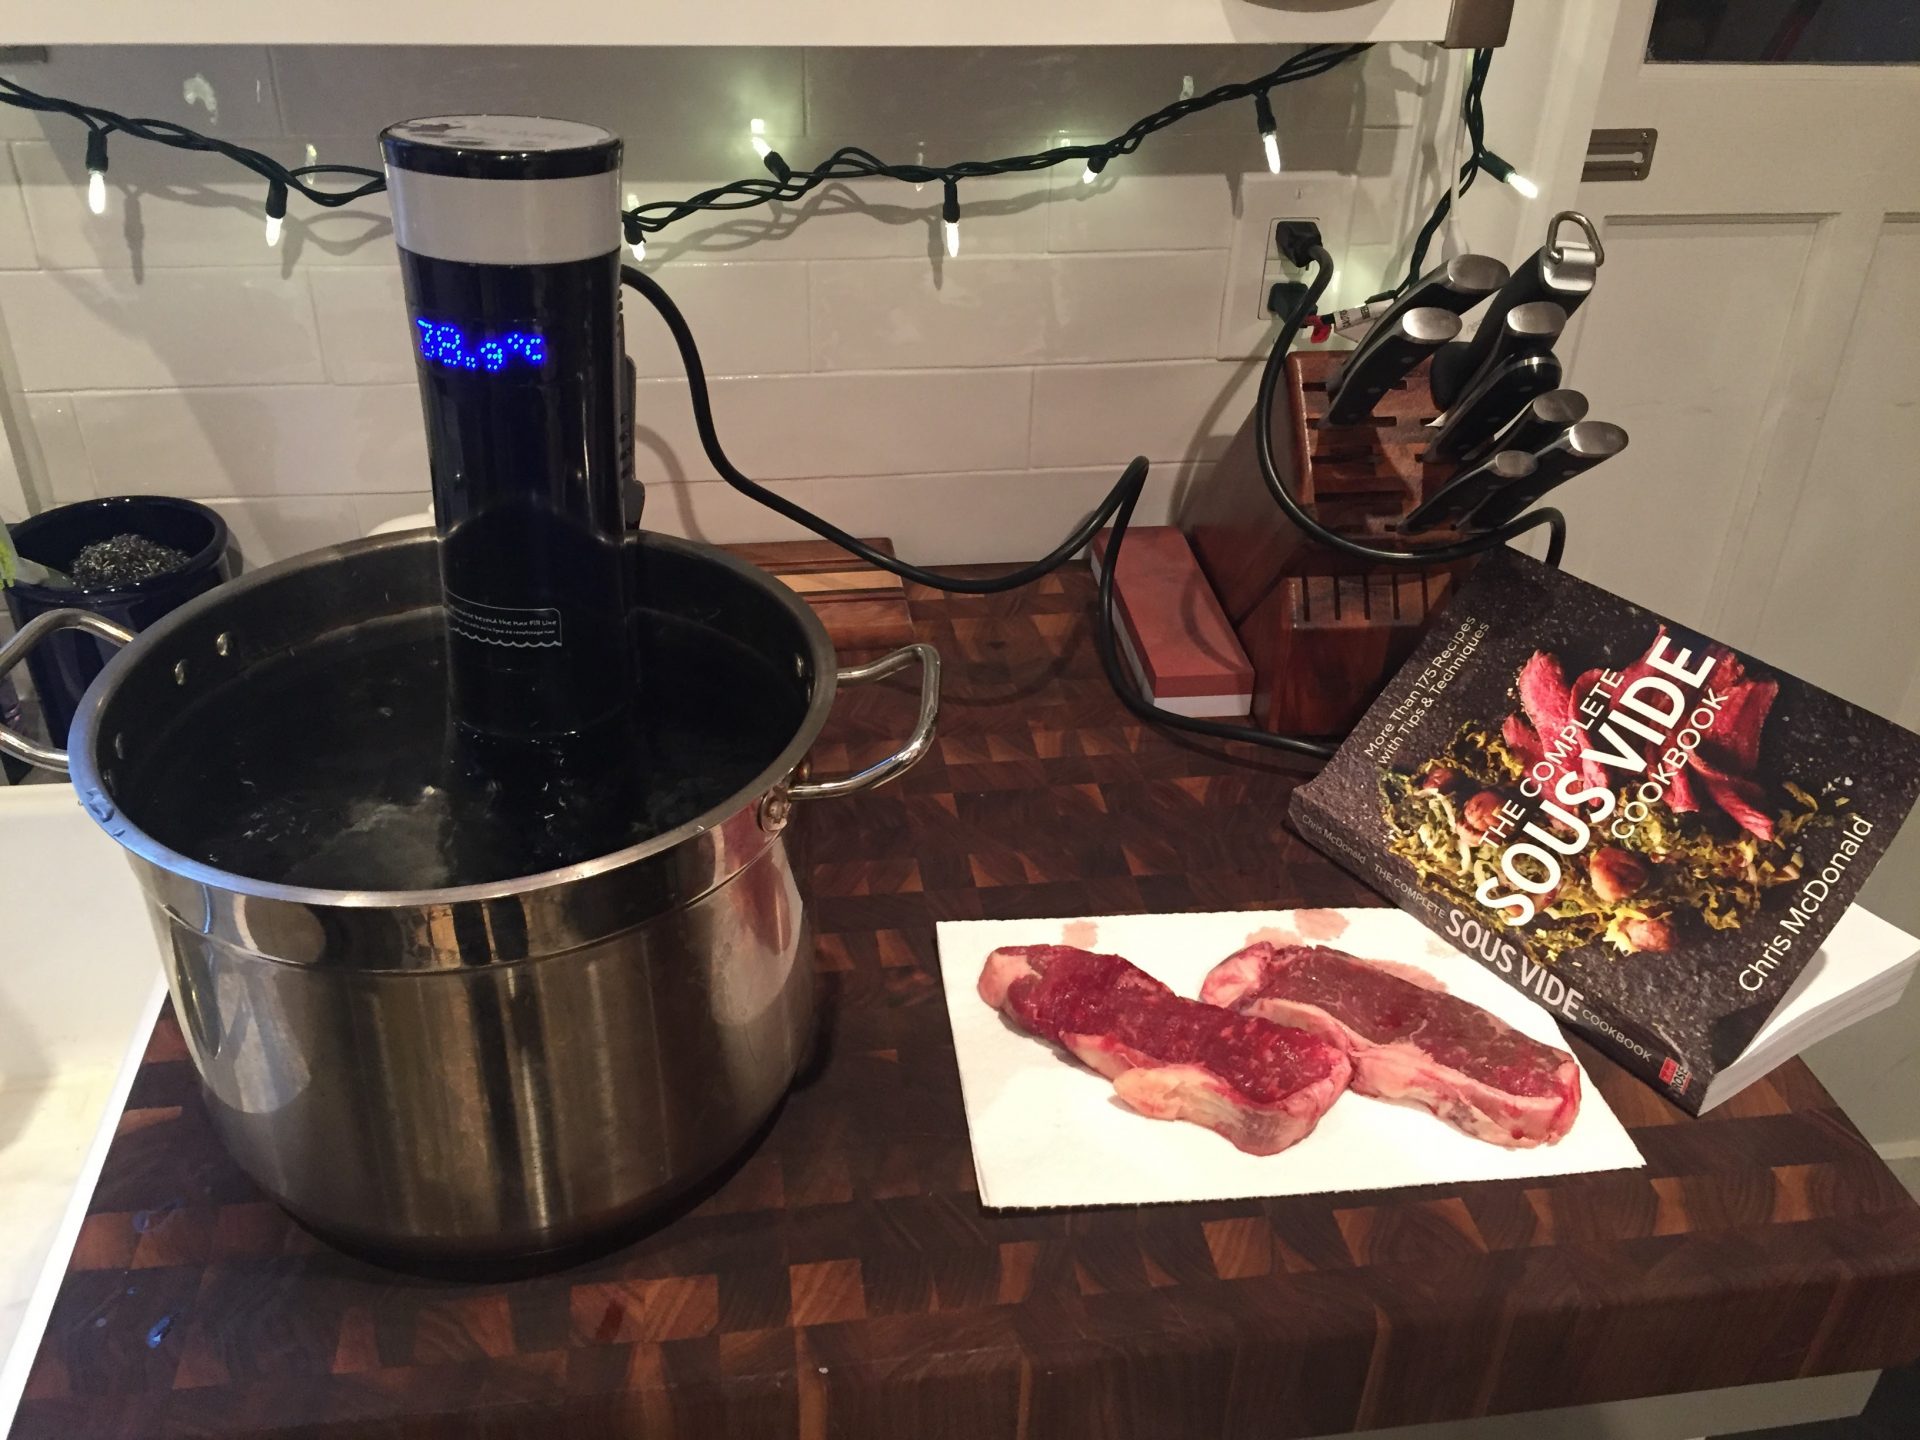 Starting off simply, getting to know the Sansaire Sous Vide with a couple of New York steaks.